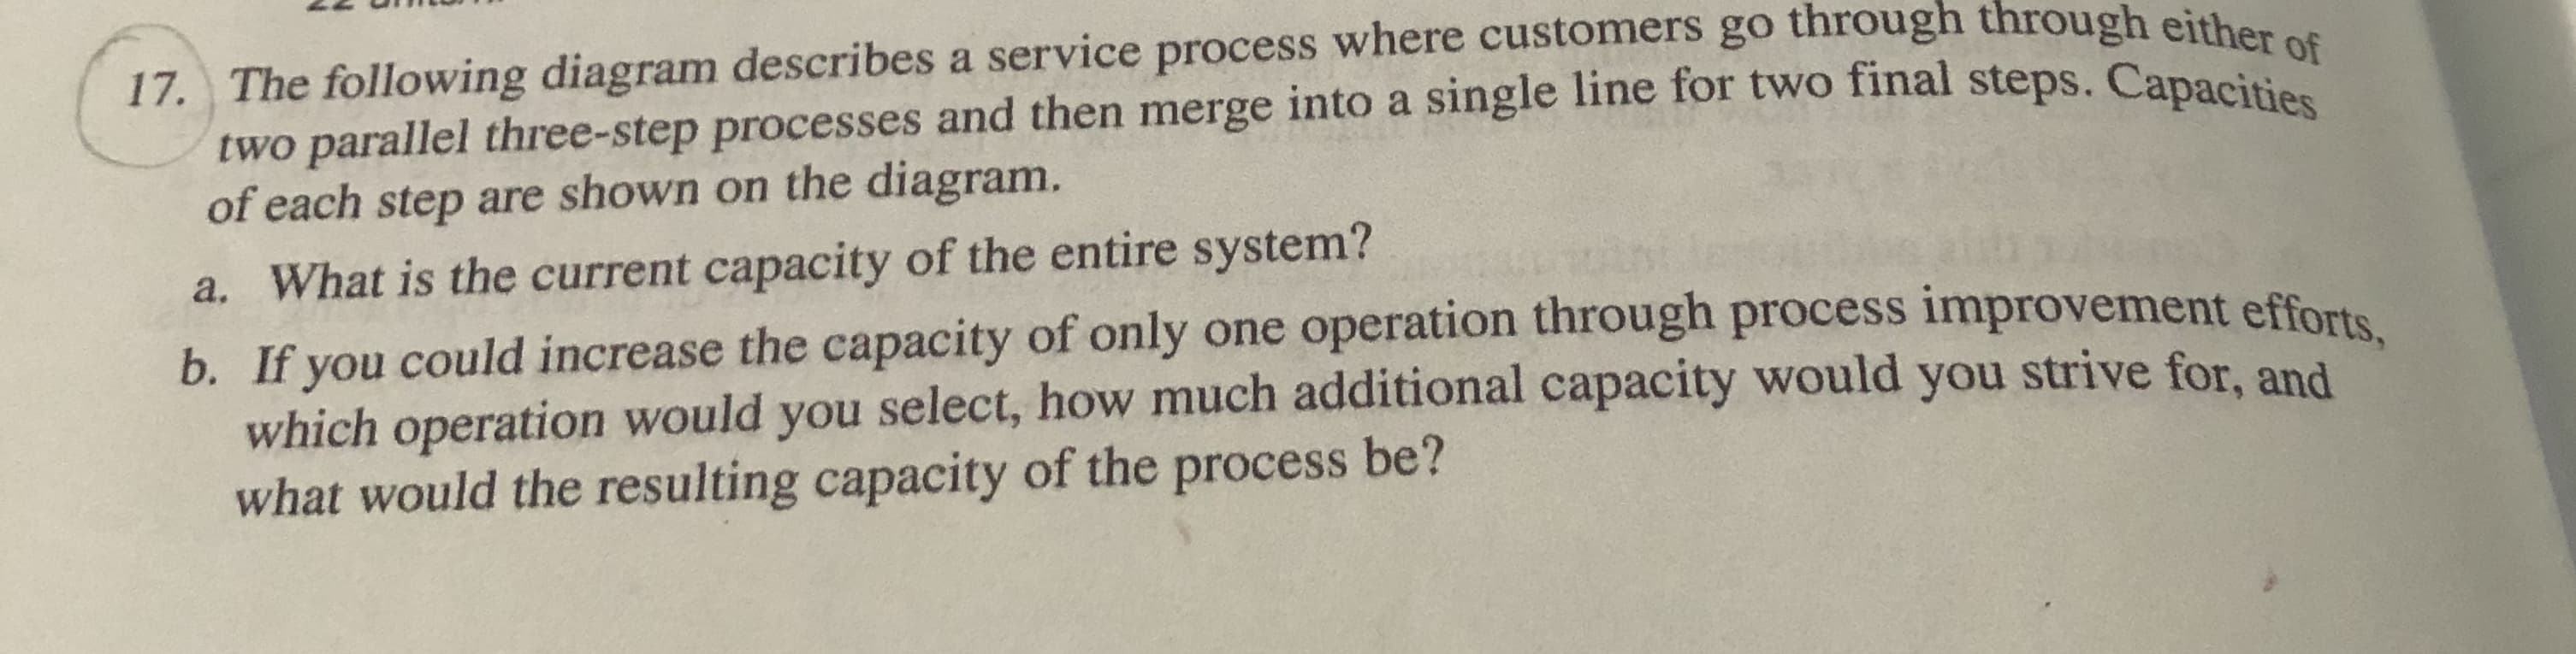 17. The following diagram describes a service process where customers go through through either of
two parallel three-step processes and then merge into a single line for two final steps. Capacitios
of each step are shown on the diagram.
a. What is the current capacity of the entire system?
b. If you could increase the capacity of only one operation through process improvement efforts
which operation would you select, how much additional capacity would you strive for, and
what would the resulting capacity of the process be?
